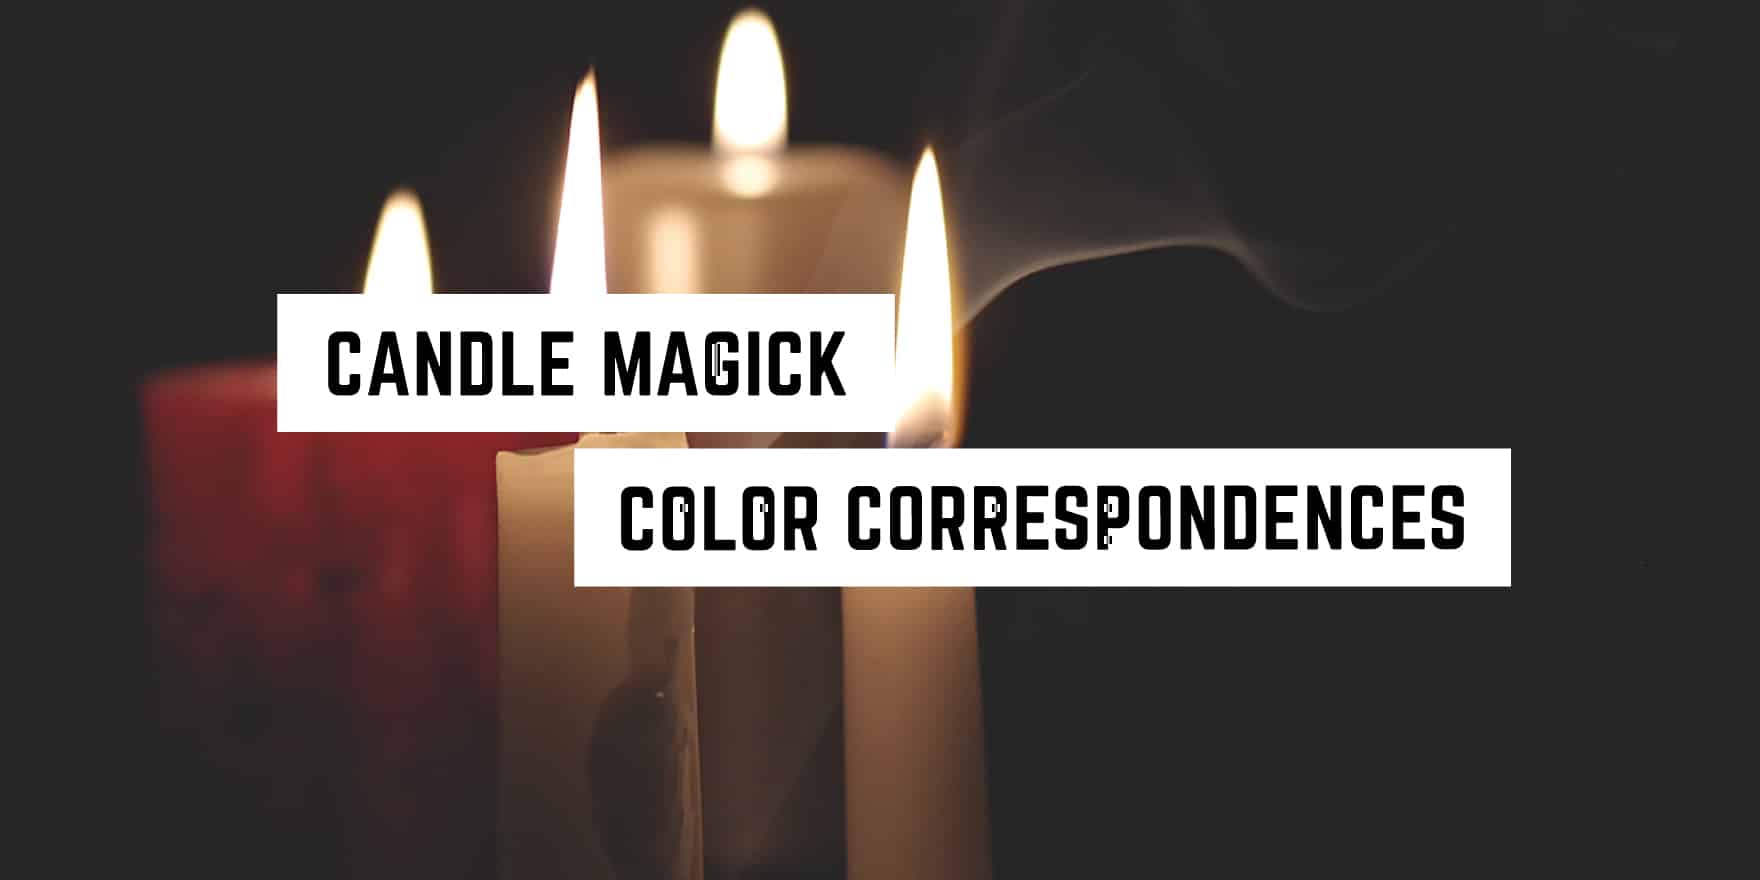 Exploring the significance of colors in candle magic rituals, a metaphysical aspect of new age product practices.